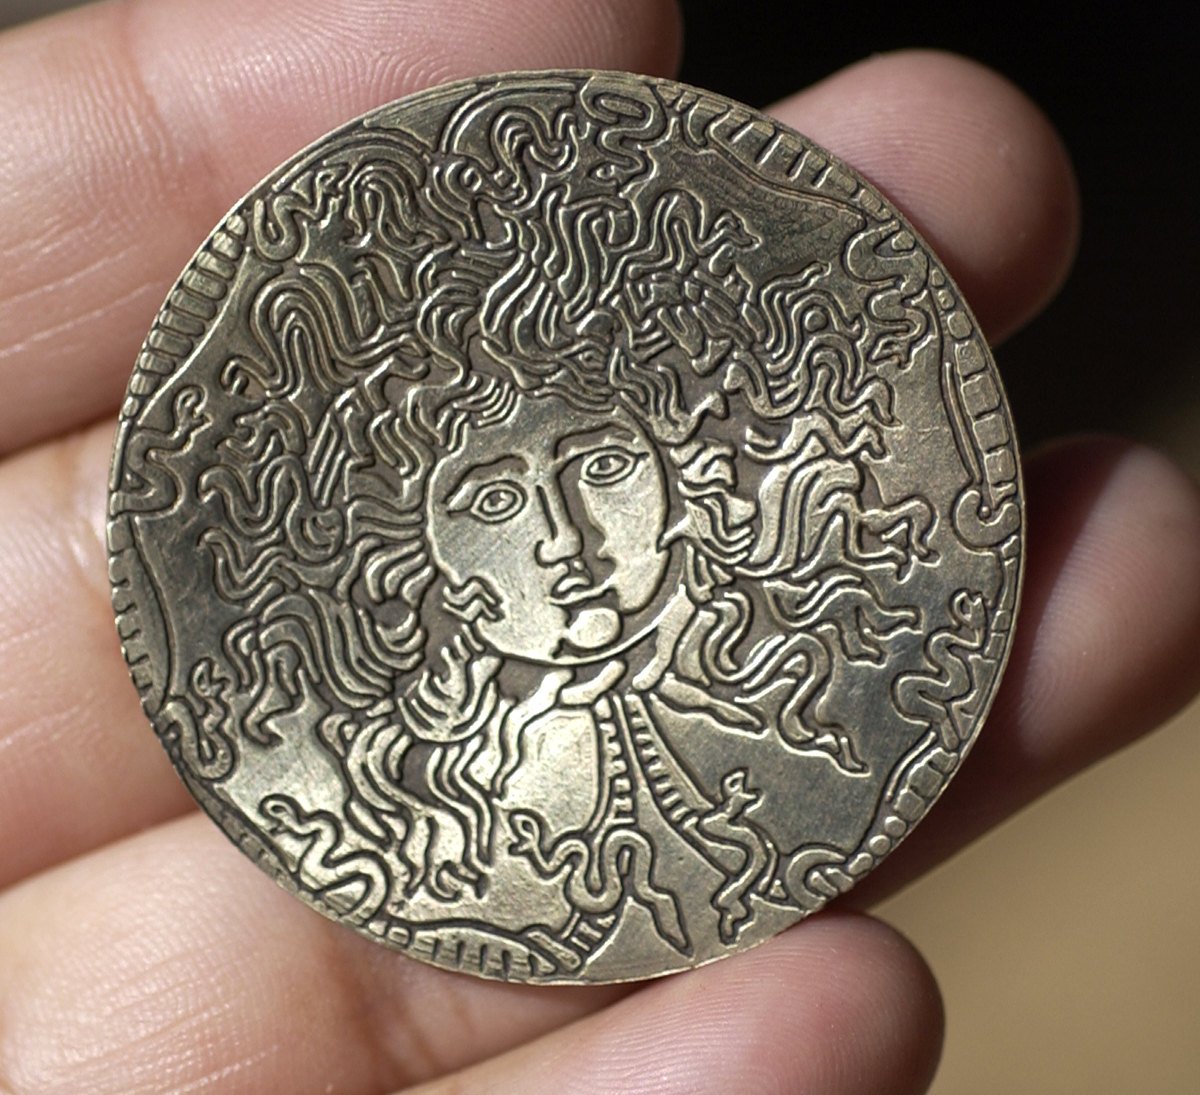 Classic Medusa 40mm Disc Blank, Enameling Soldering Stamping Texturing Jewelry Charm - 2 Pieces